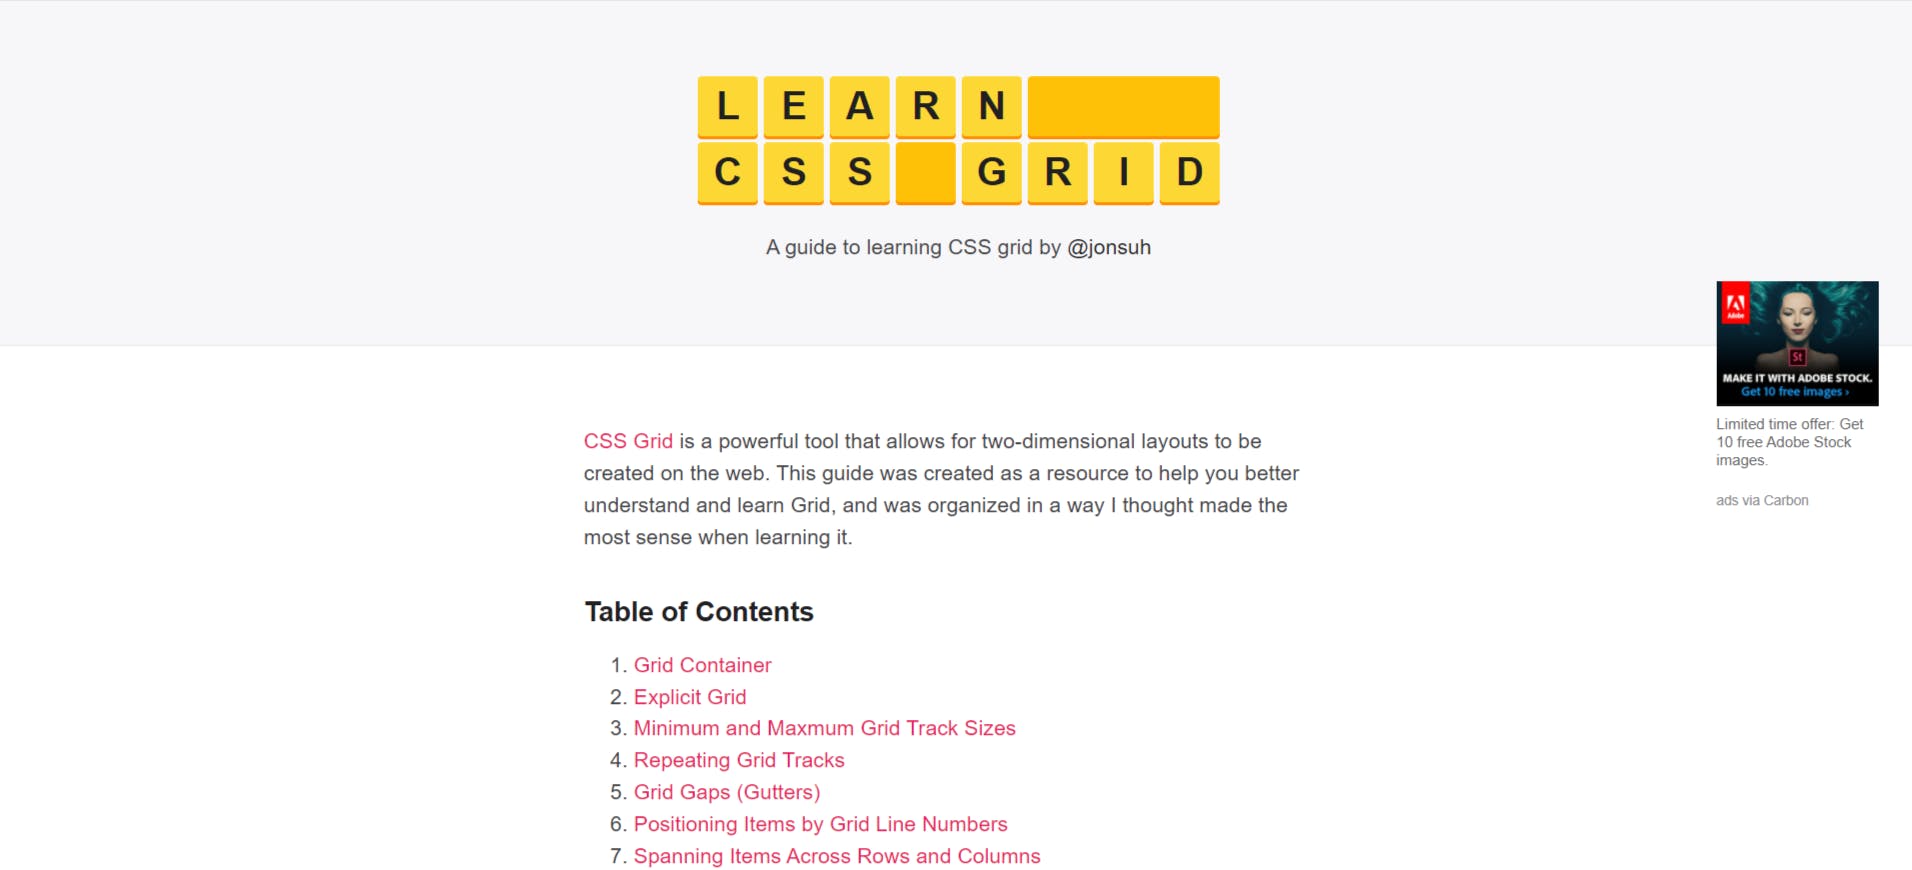 Learn CSS Grid - A Guide to Learning CSS Grid _ Jonathan Suh.png